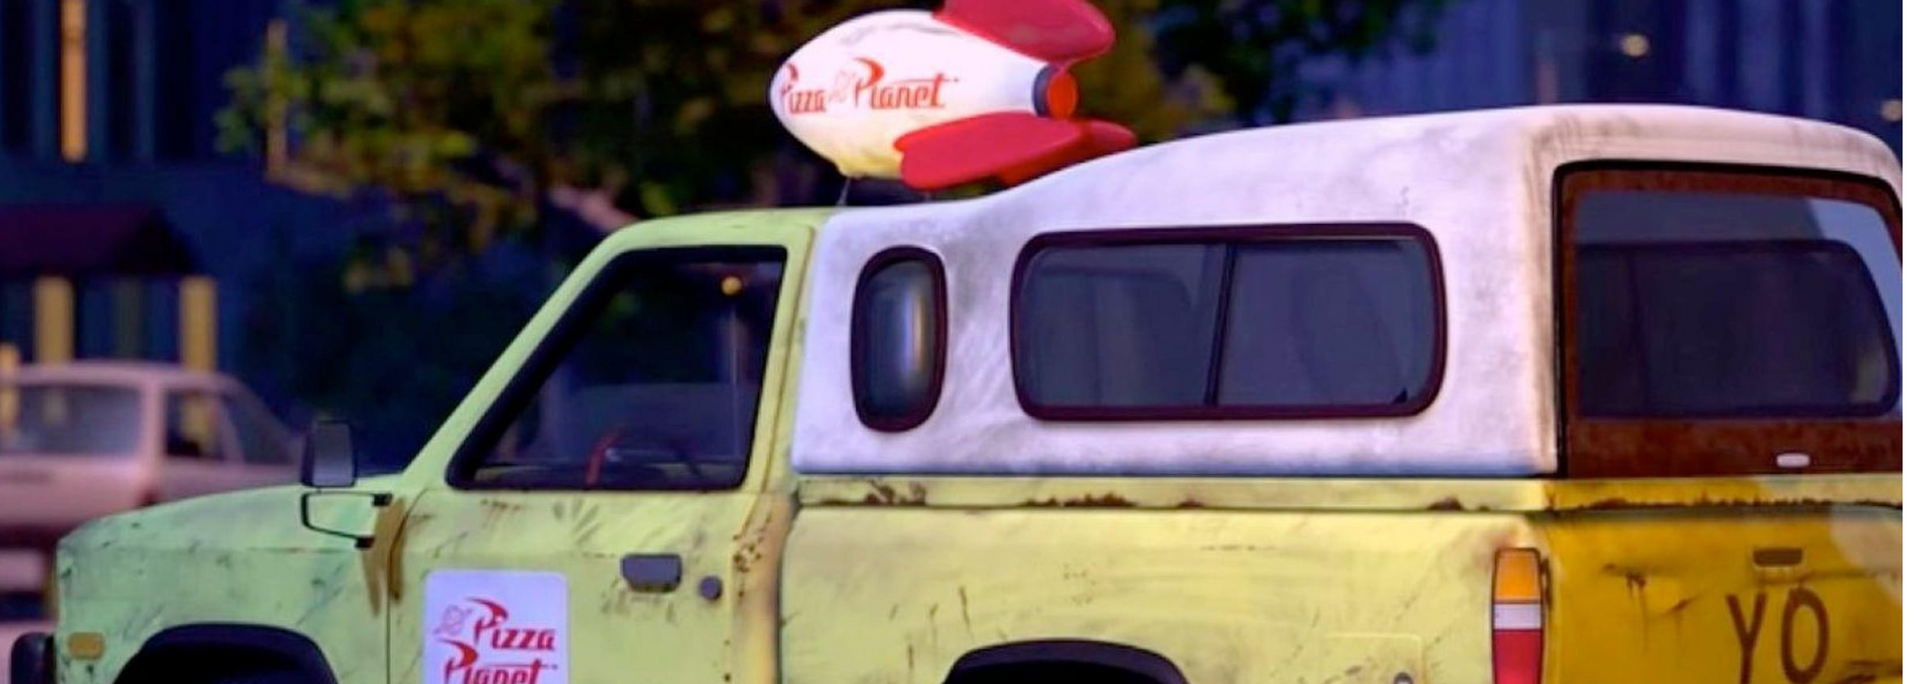 Picture of the Pizza Planet van from Toy Story.